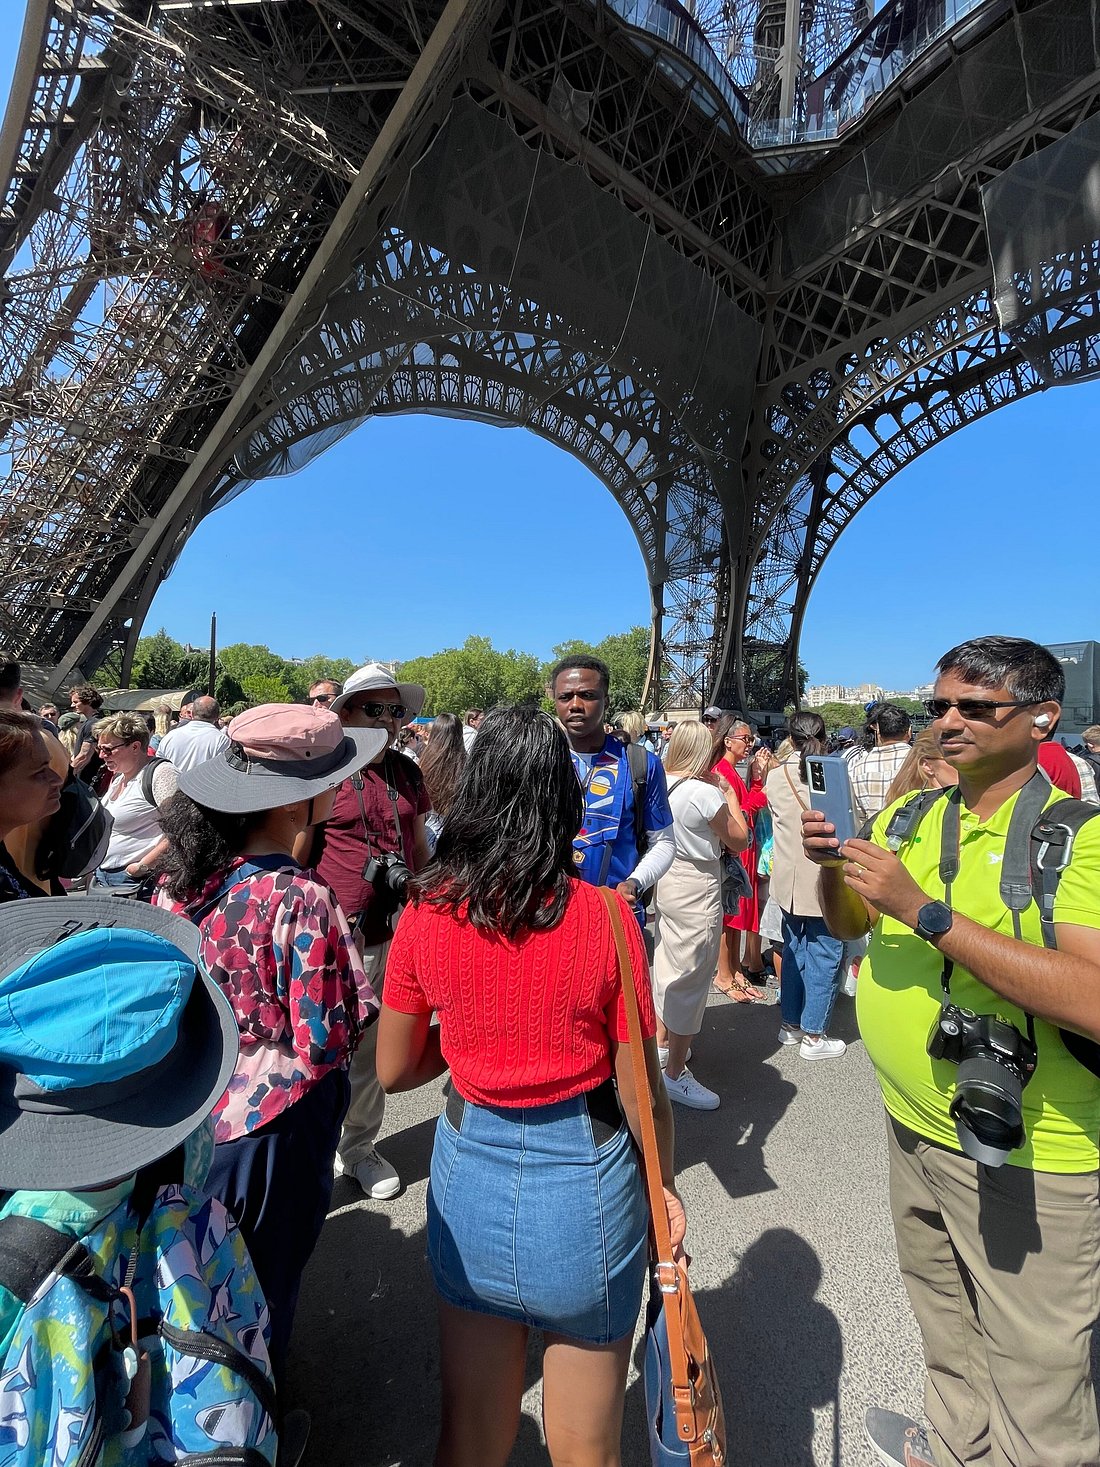 Bayo touring Eiffel Tower with group